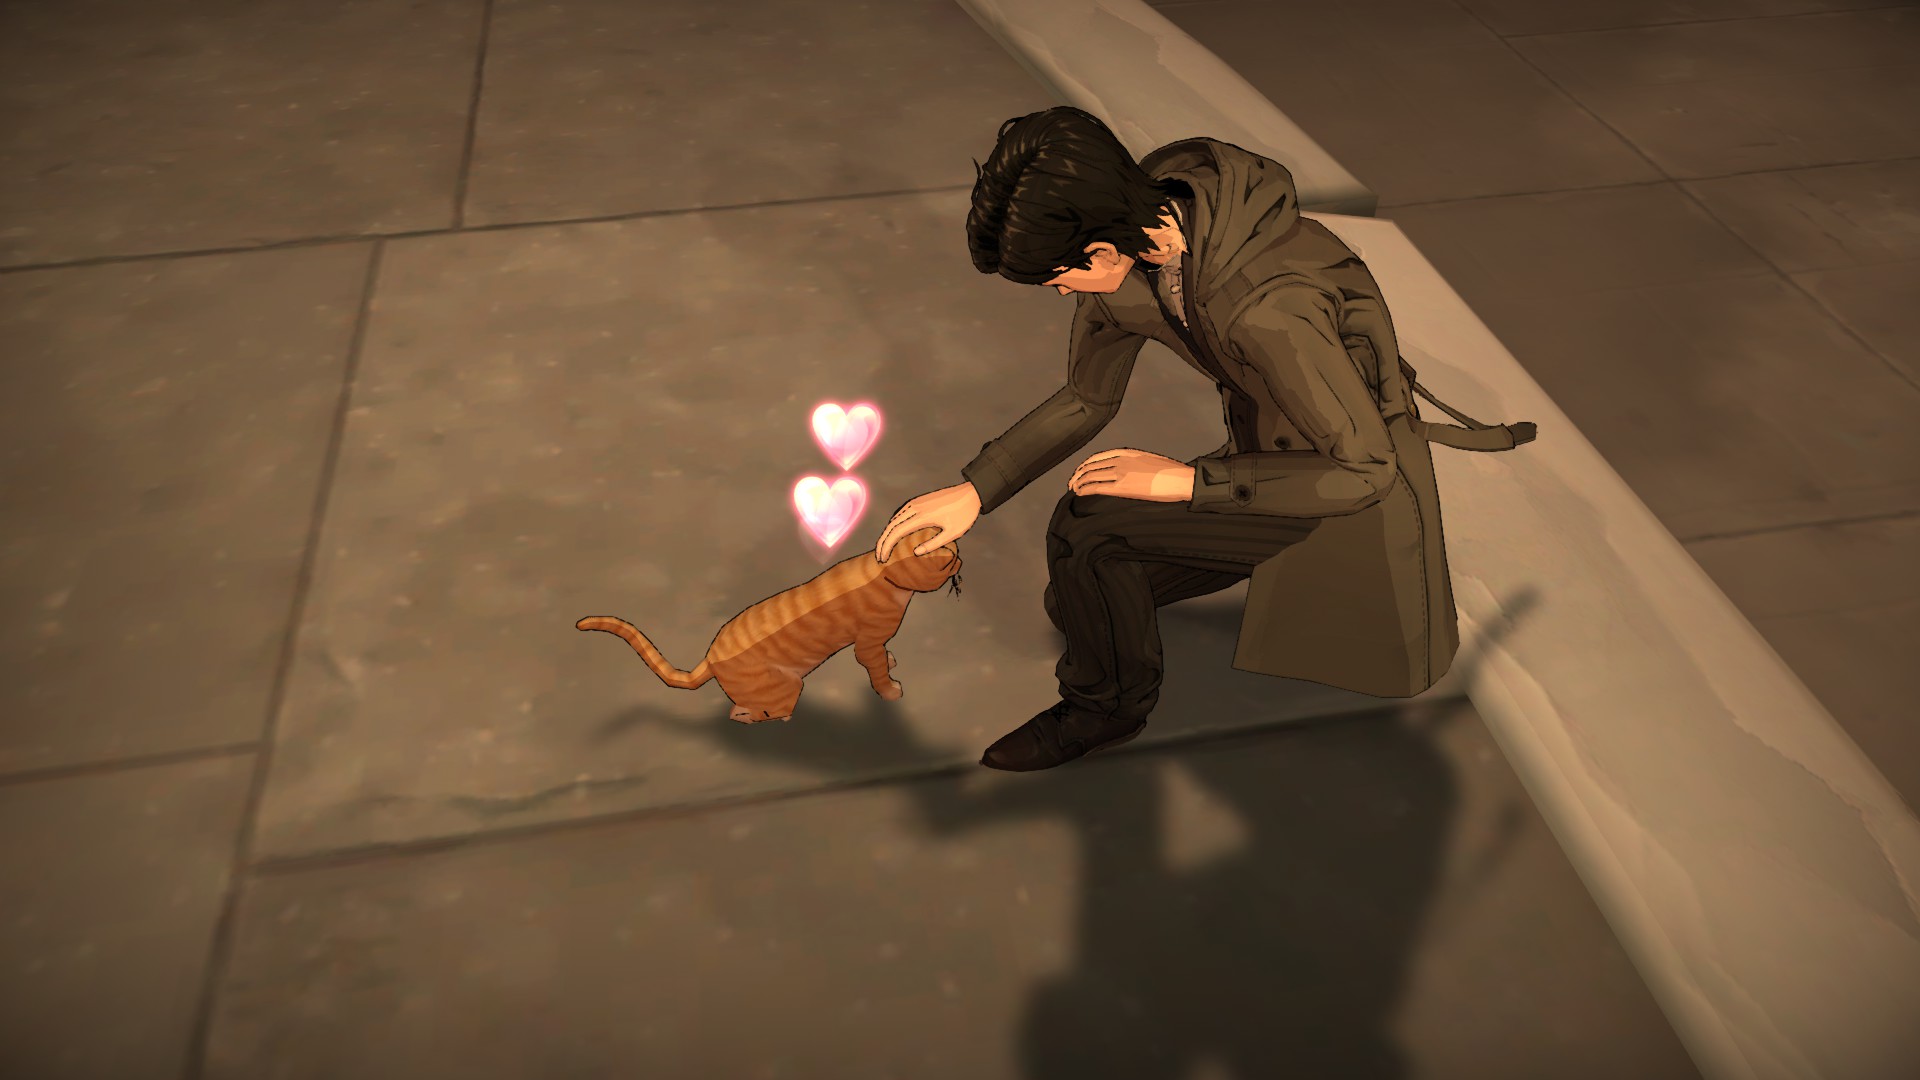 A man wearing a trench coat with brunette hair kneeling down on concrete to gently pet a ginger cat, with pink hearts rising from it.